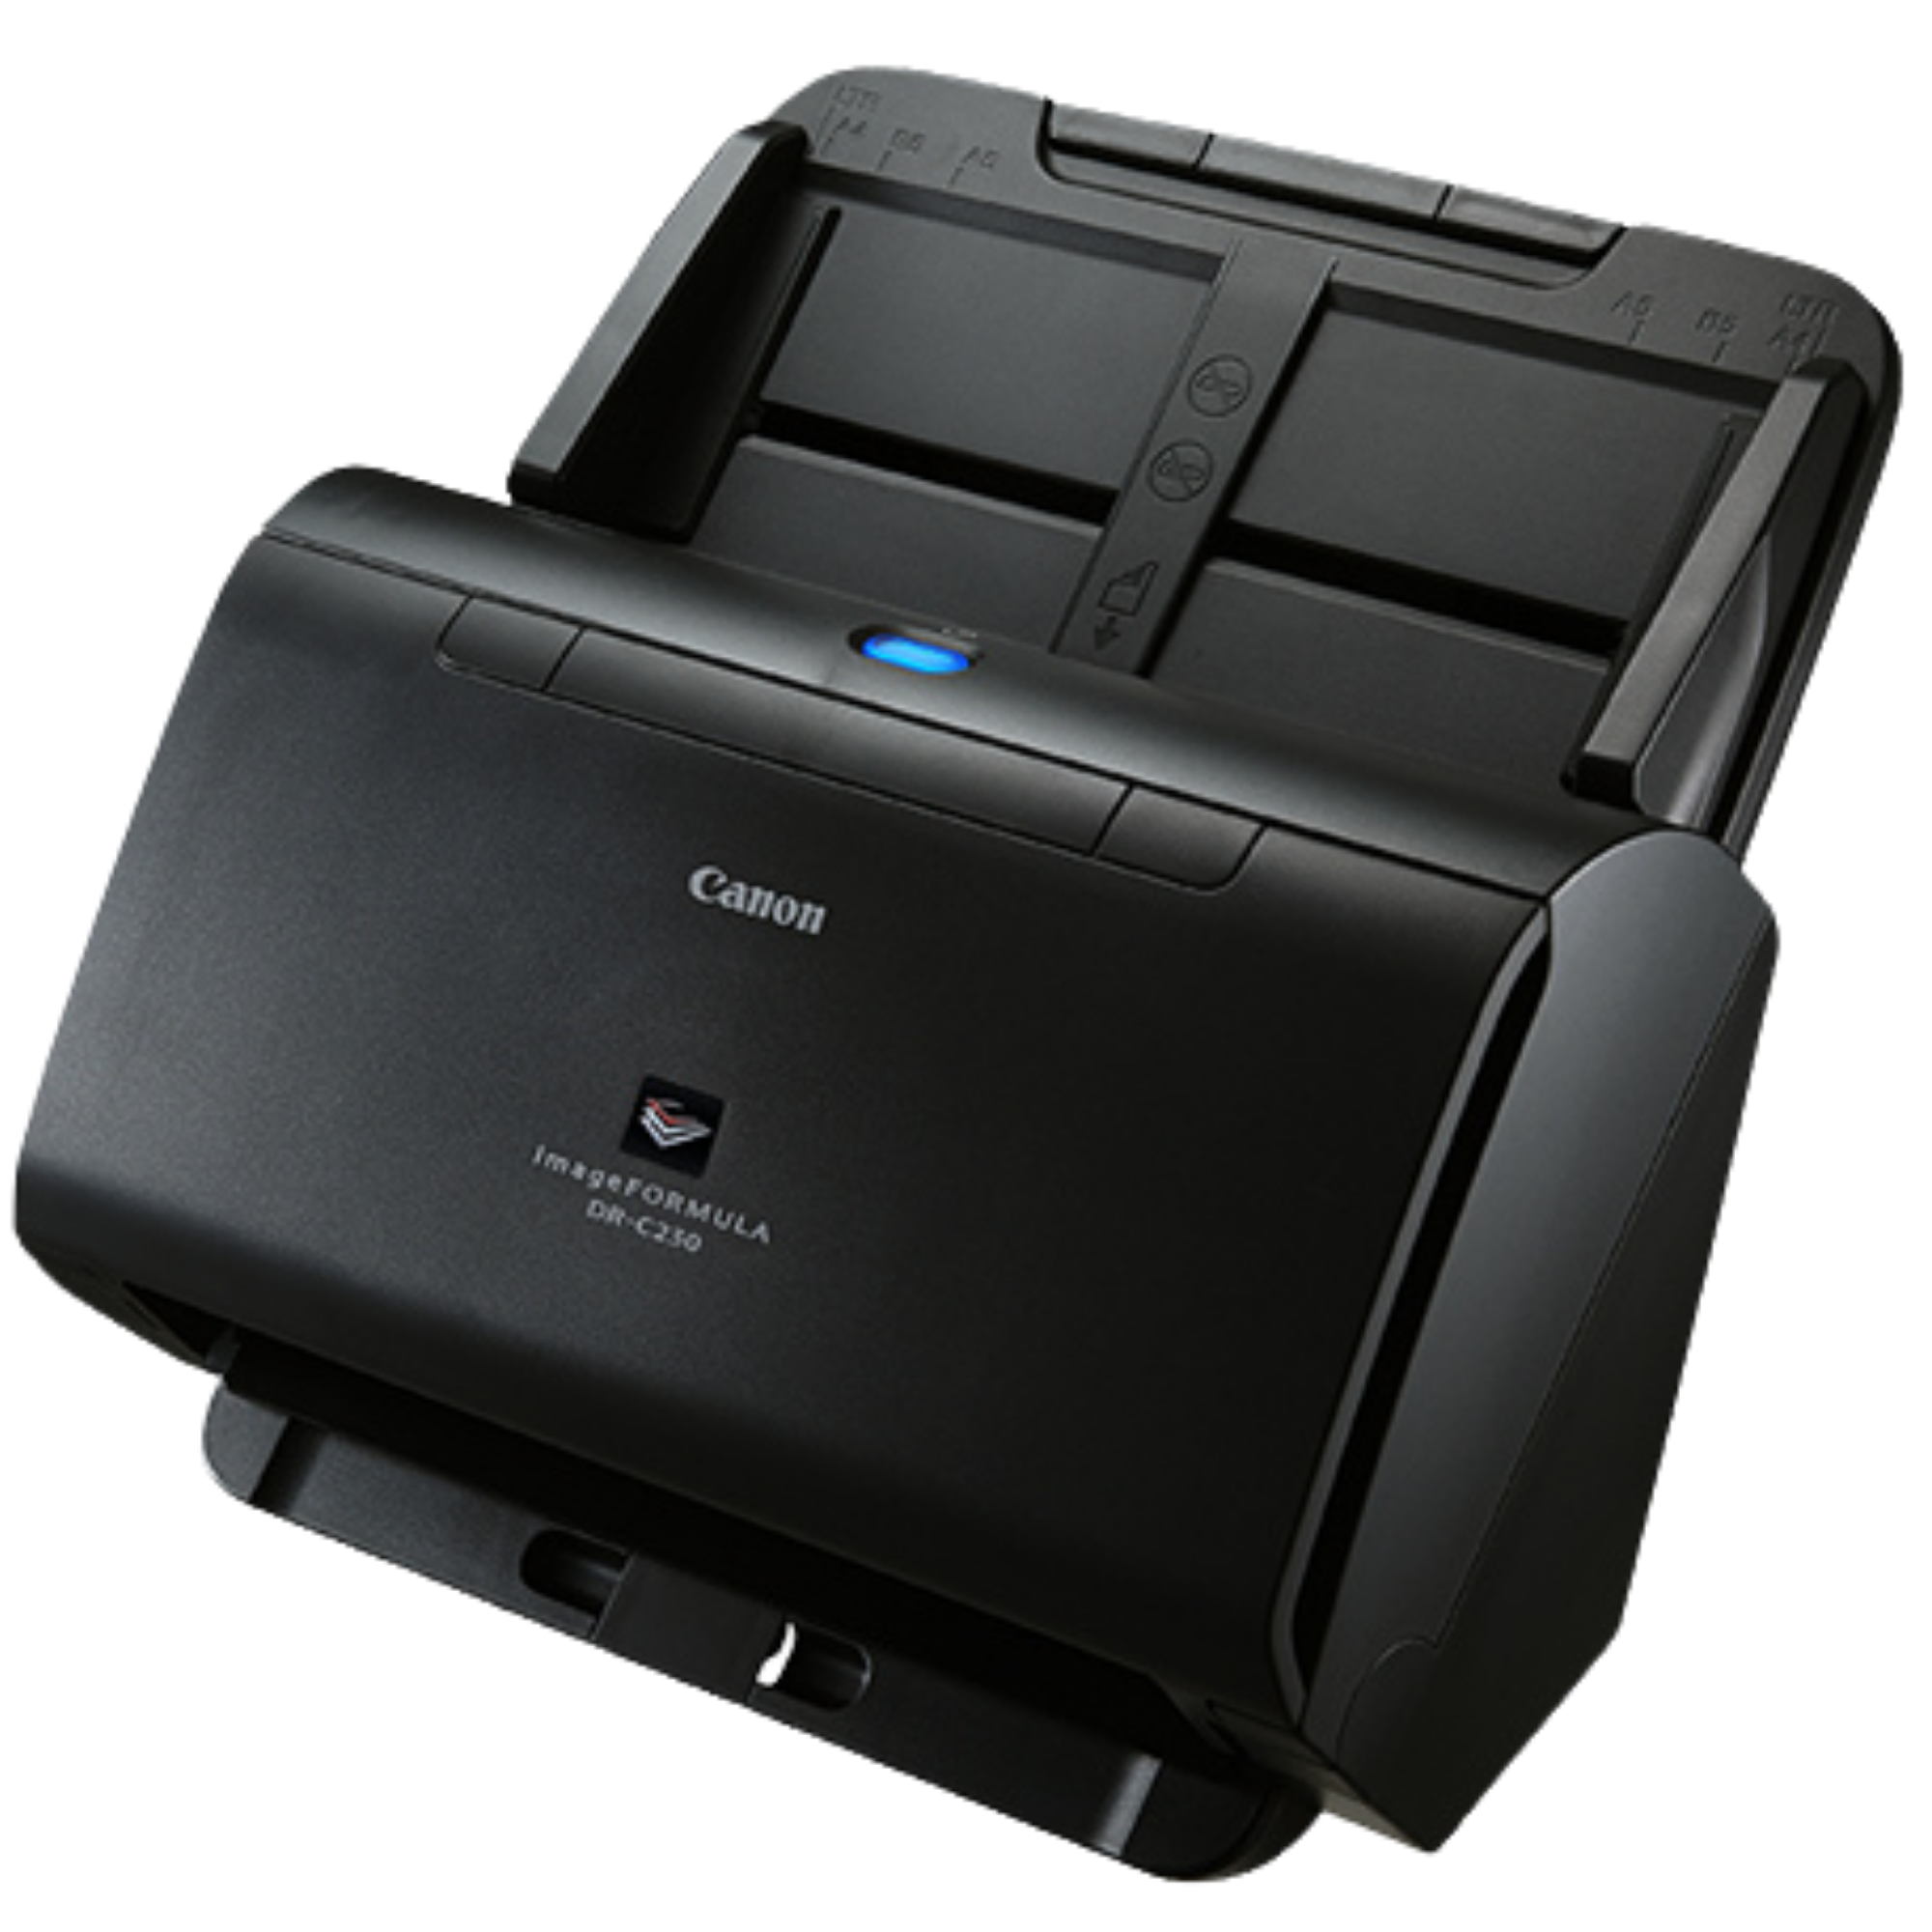 Canon Desktop Scanner from the document imaging experts